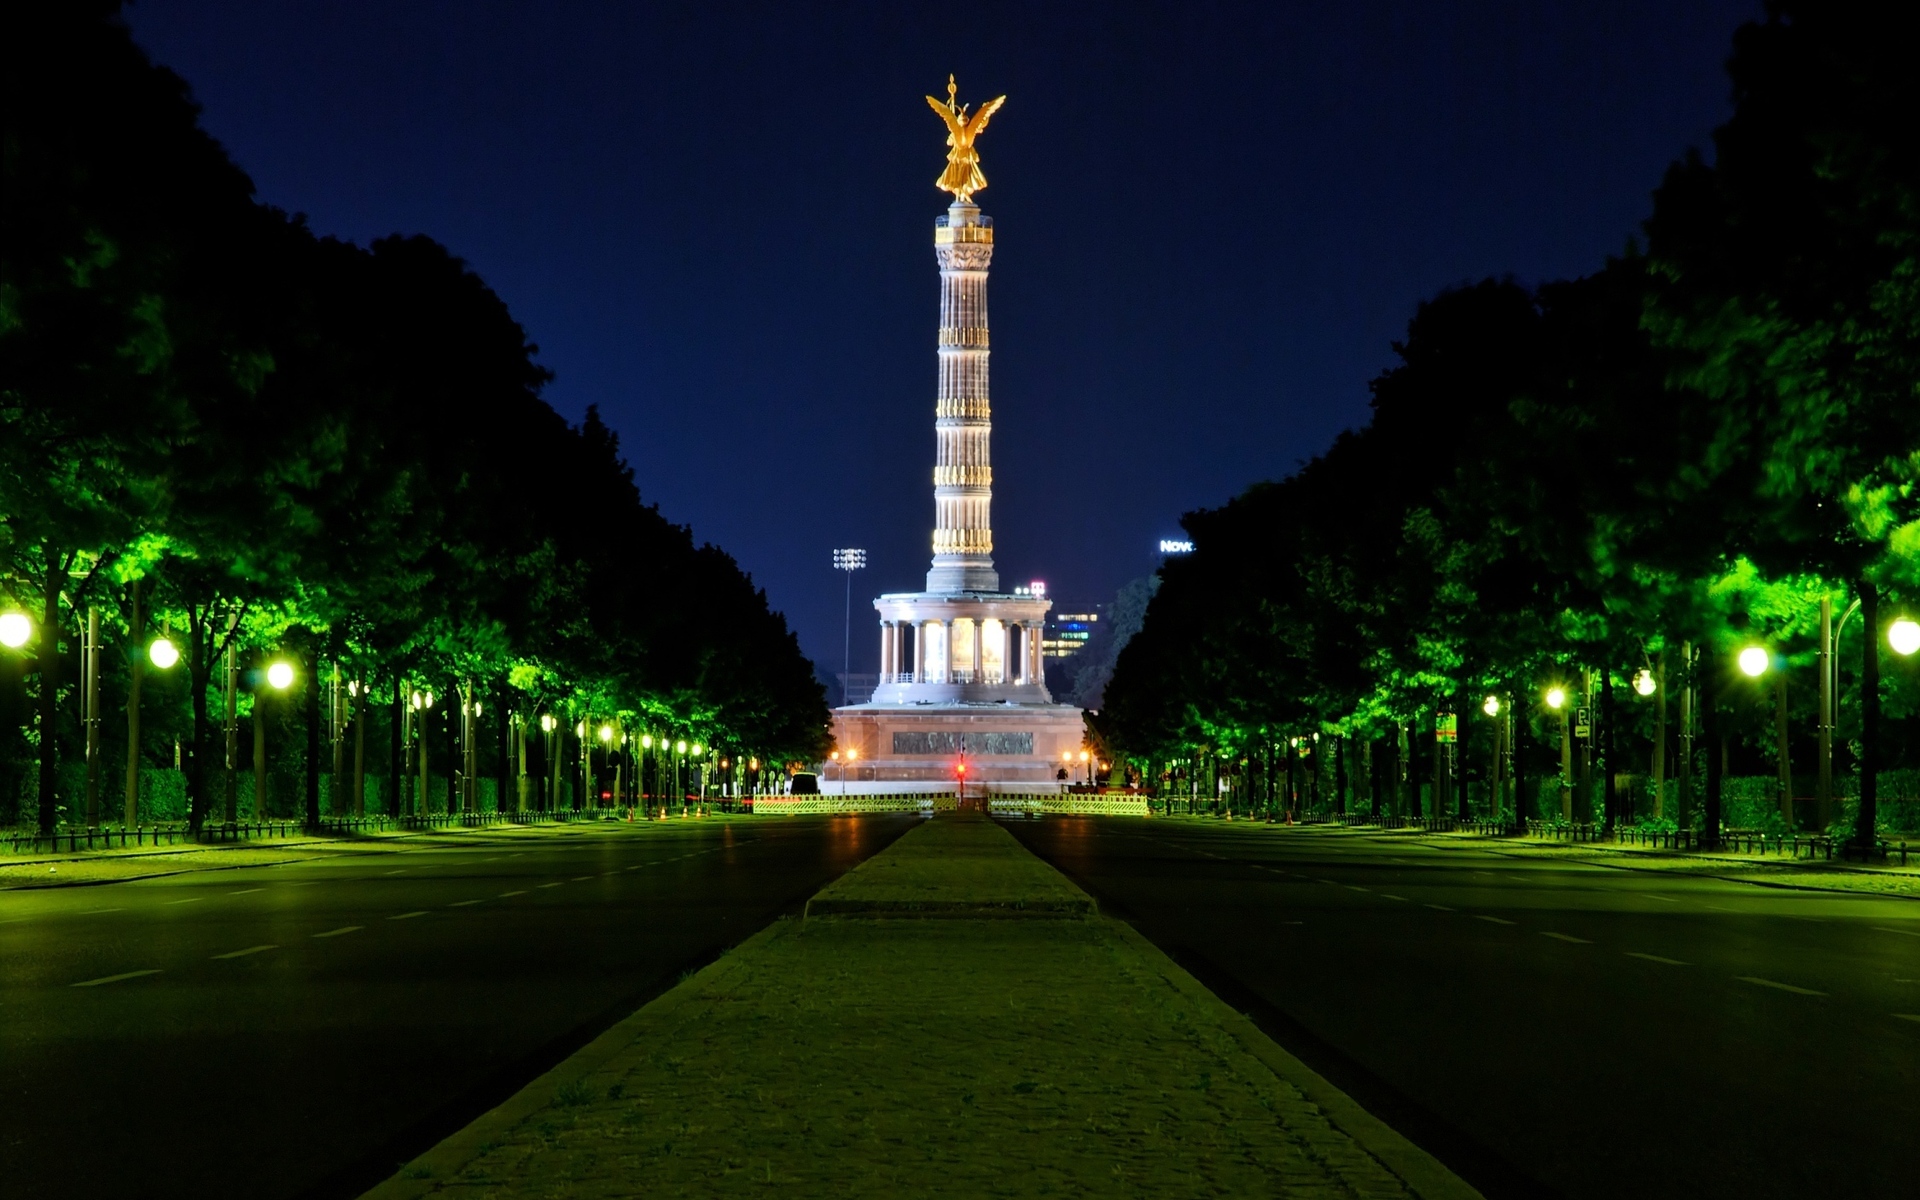 berlin, germany, man made, berlin victory column, architecture, light, night, monuments